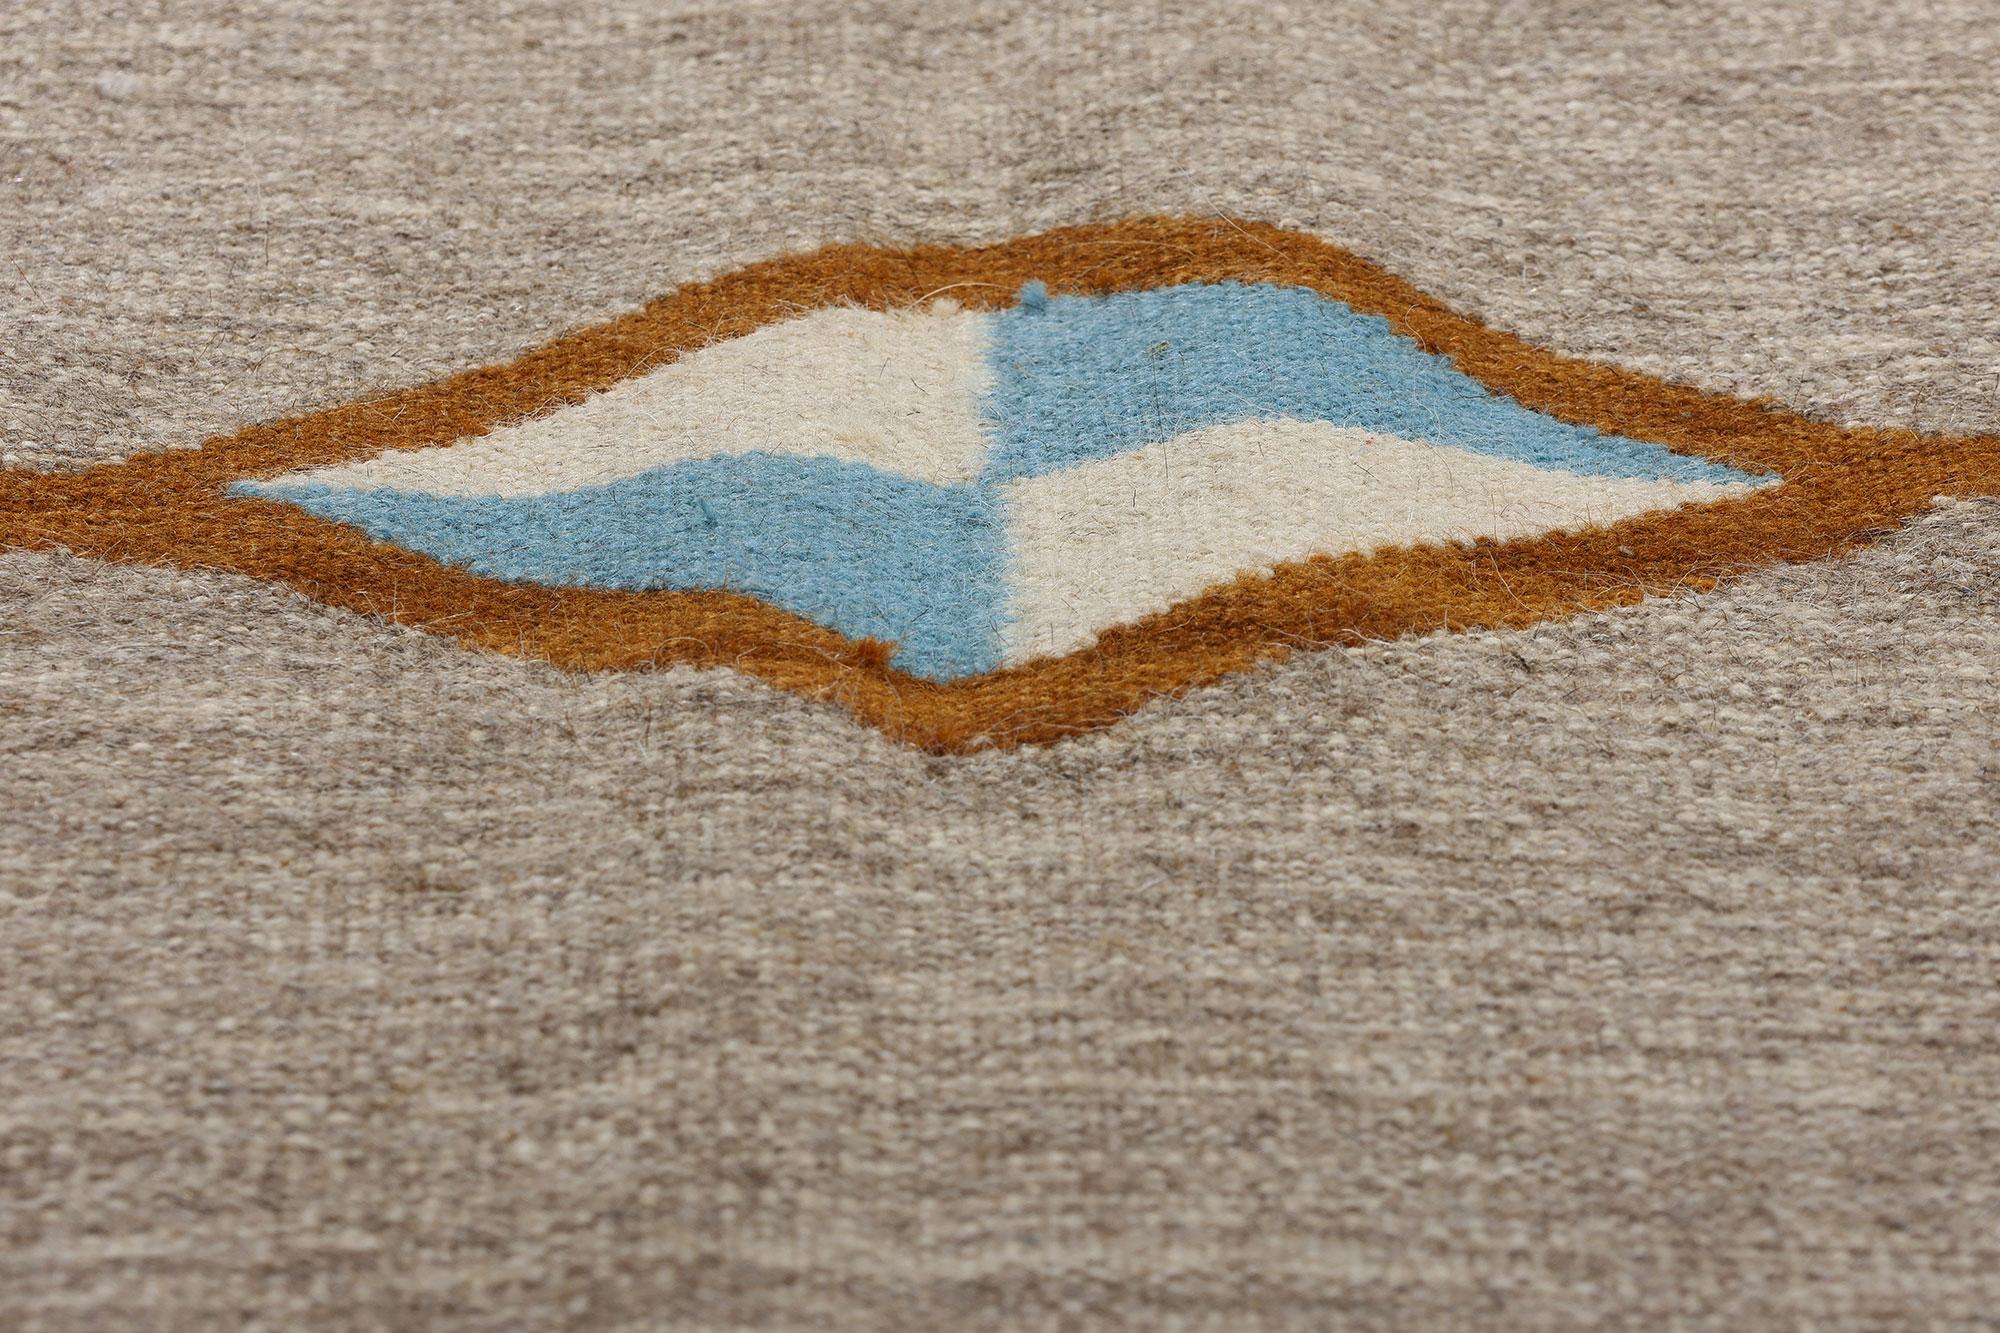 Southwest Modern Navajo-Style Storm Pattern Rug Contemporary Santa Fe In New Condition For Sale In Dallas, TX